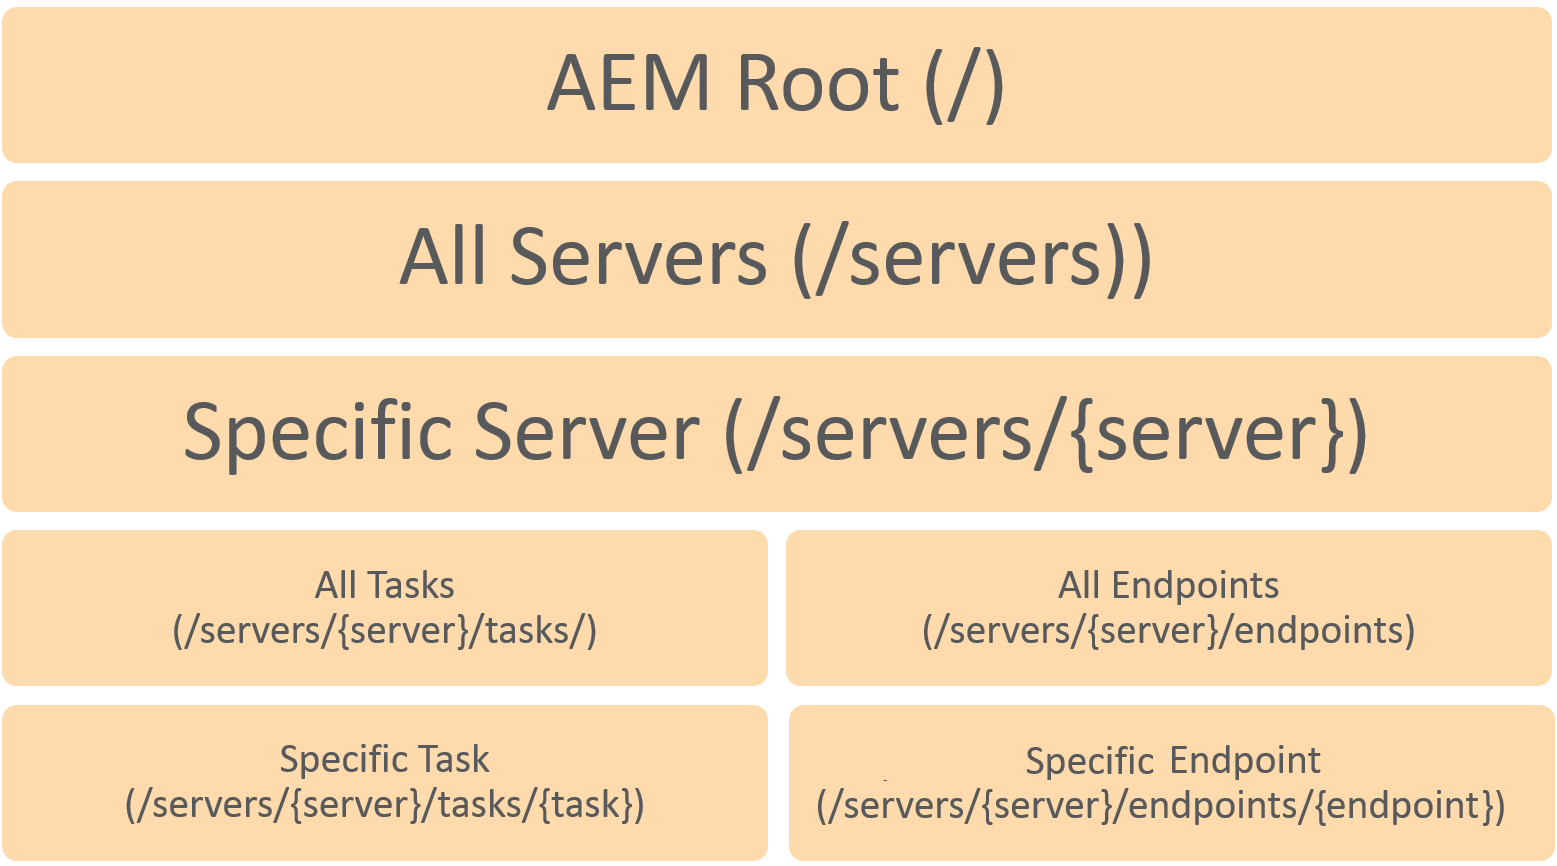 Granular access control hierarchy with AEM Root at the top, All Servers beneath, Specific Server beneath, All Tasks and All Endpoints beneath Specific Server, and Specific Task beneath All Tasks